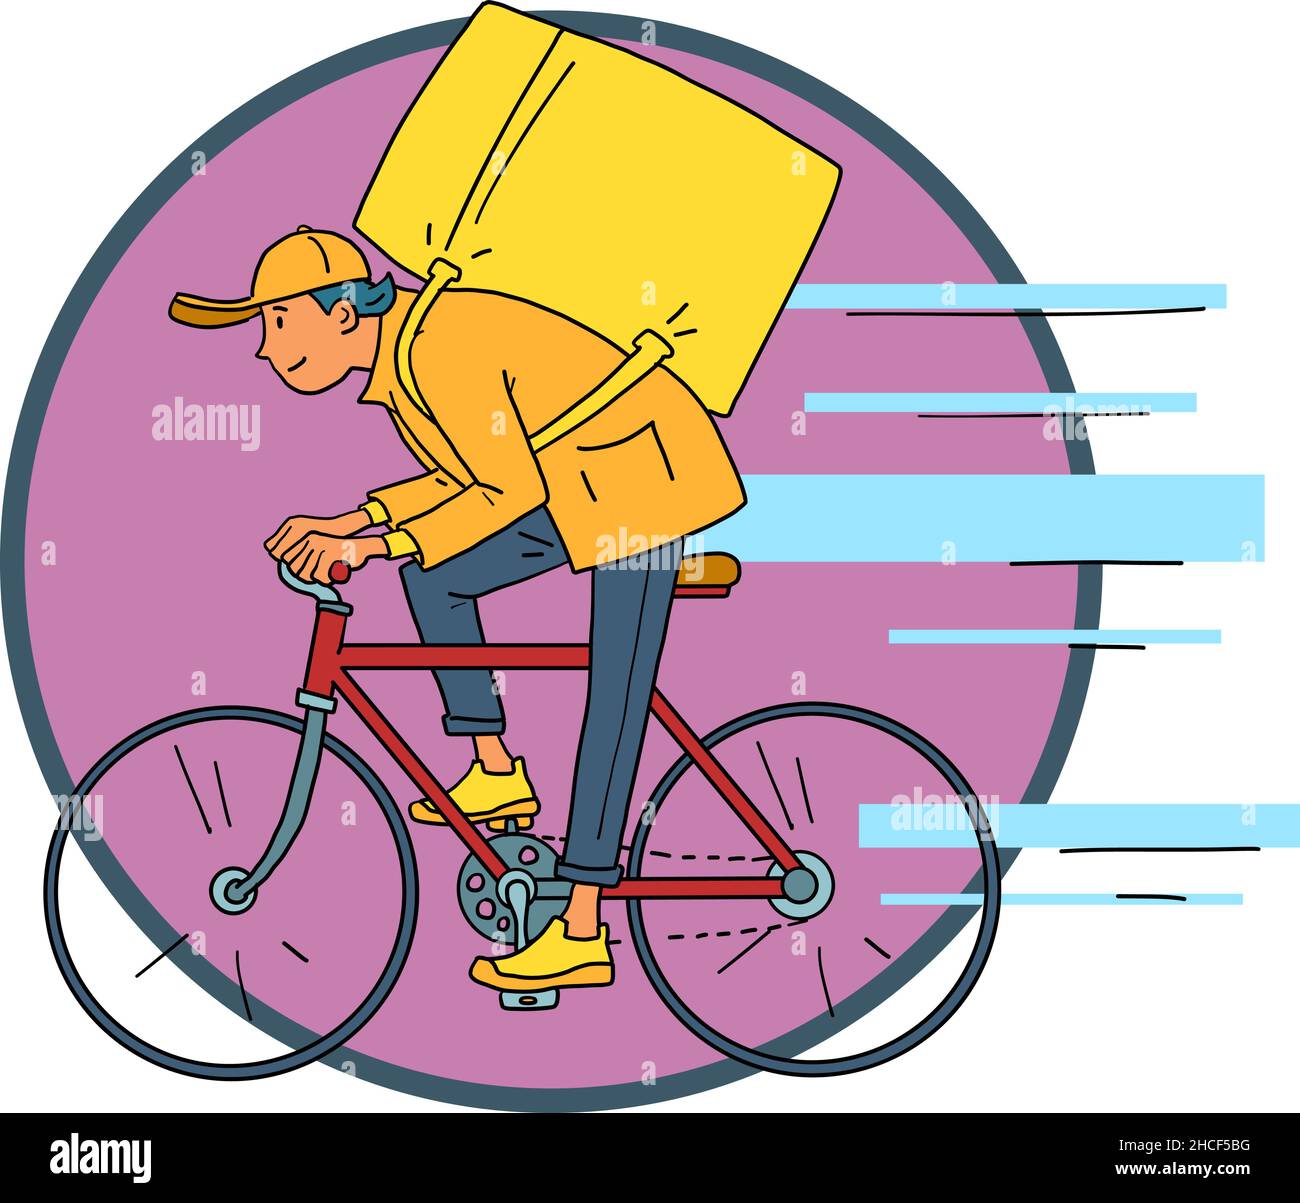 male food courier by bicycle, online delivery. Profession Stock Vector